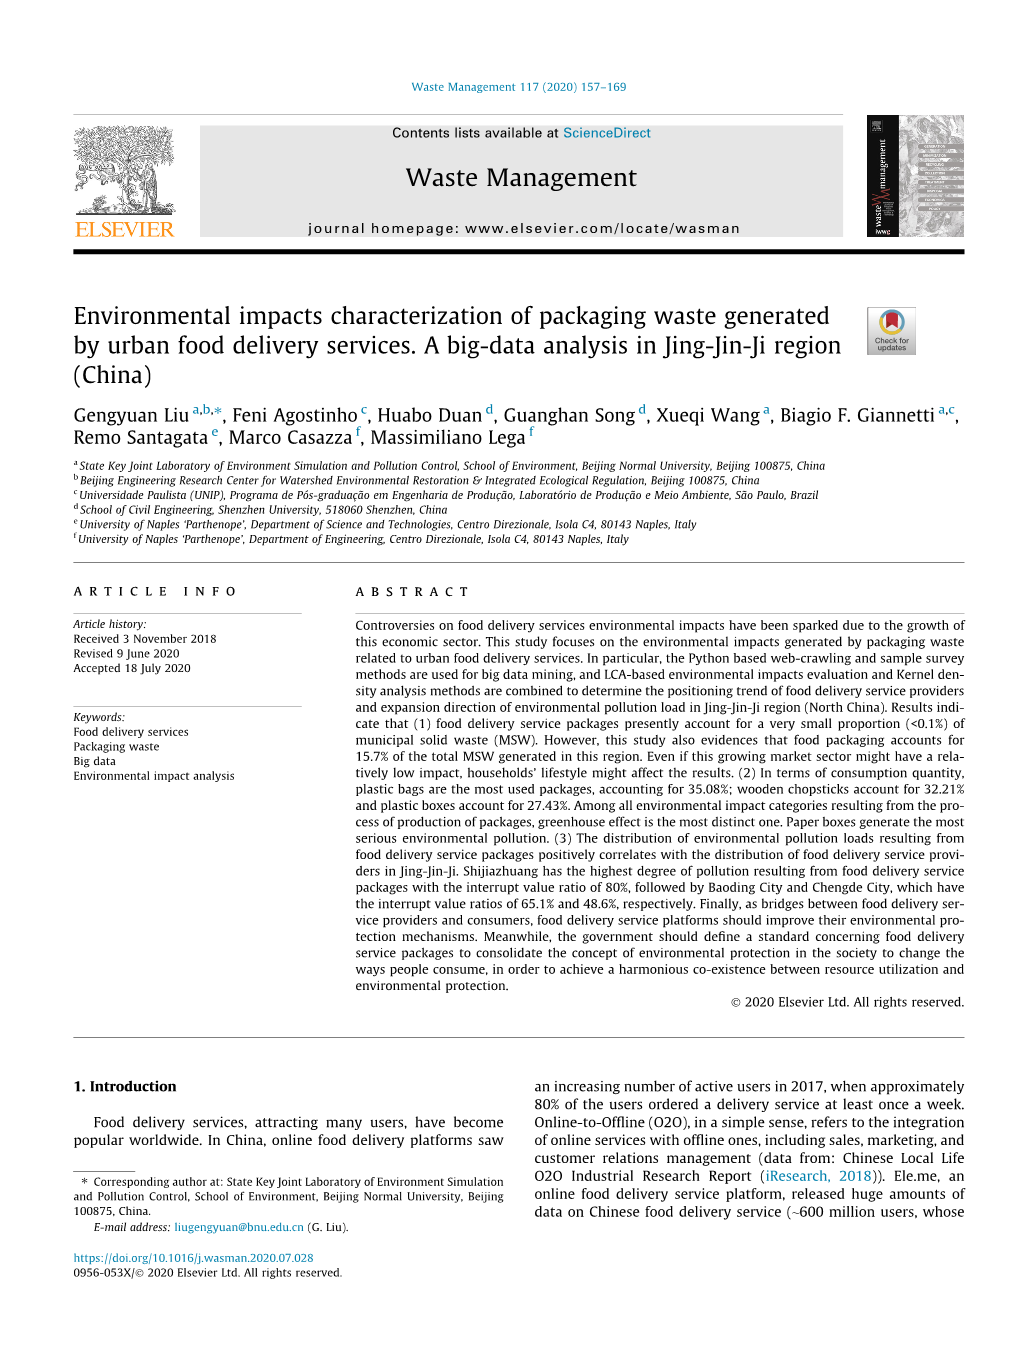 Environmental Impacts Characterization of Packaging Waste Generated by Urban Food Delivery Services